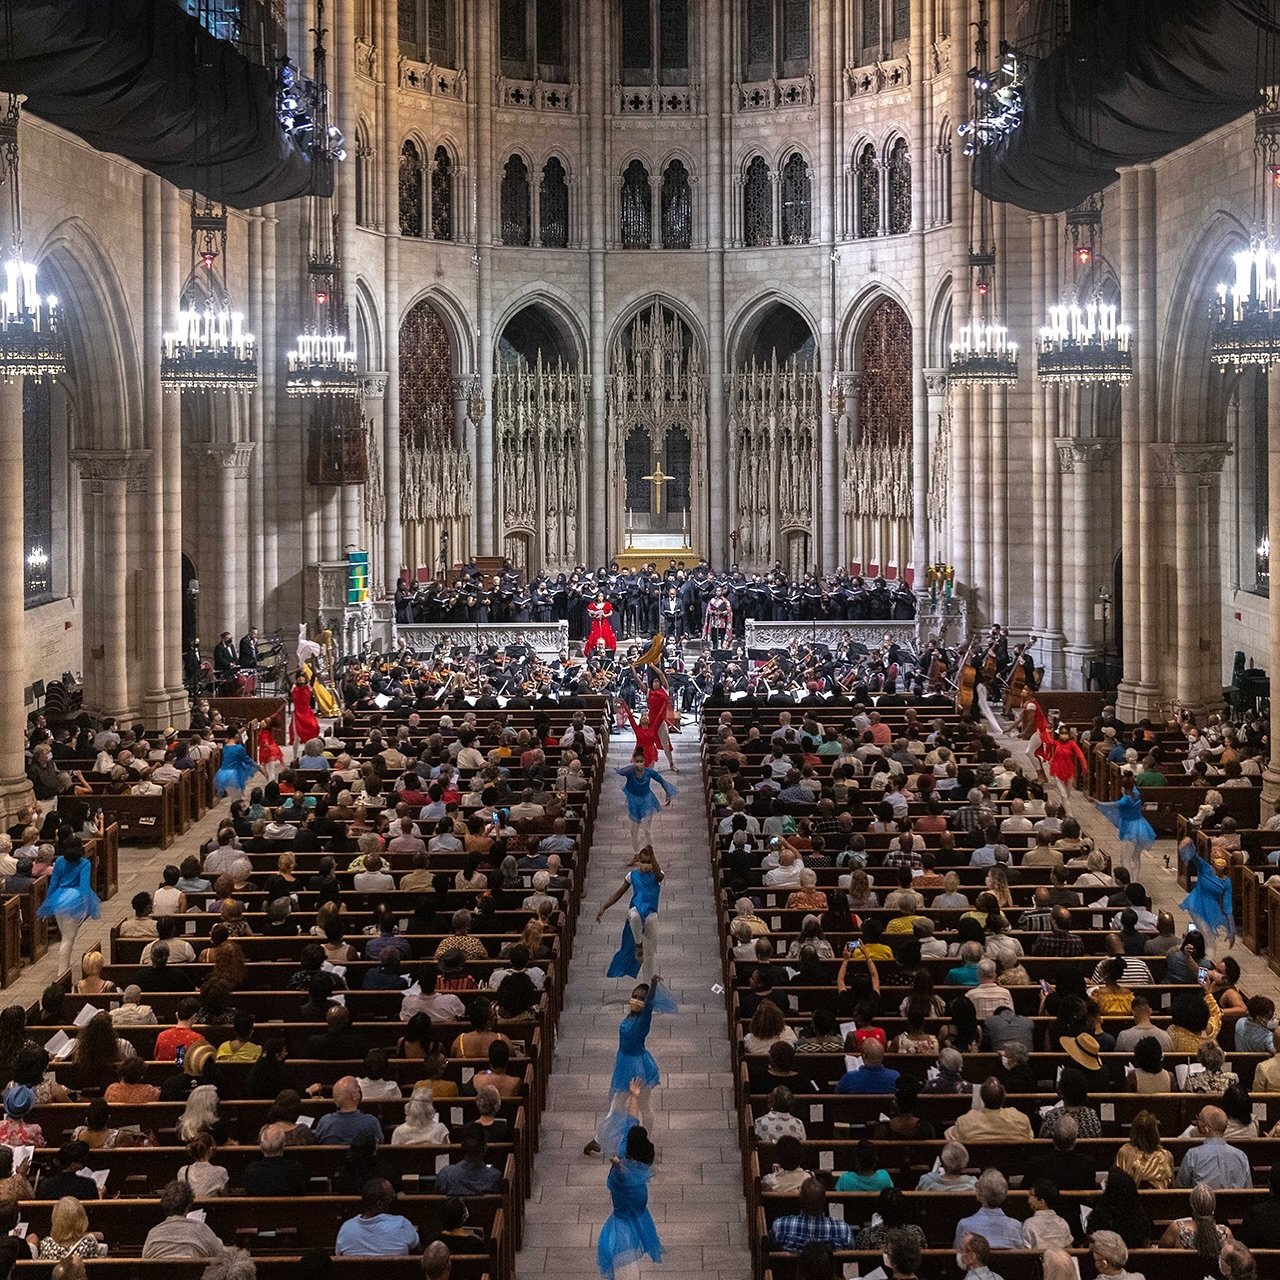 TONIGHT at 10pm on 105.9 and WQXR.org, selections from our June 2022 performance of Nathaniel Dett&rsquo;s &ldquo;The Ordering Moses&rdquo; will be aired on the &ldquo;Sacred Music and Sacred Spaces&rdquo; episode of &ldquo;New York in Concert,&rdquo